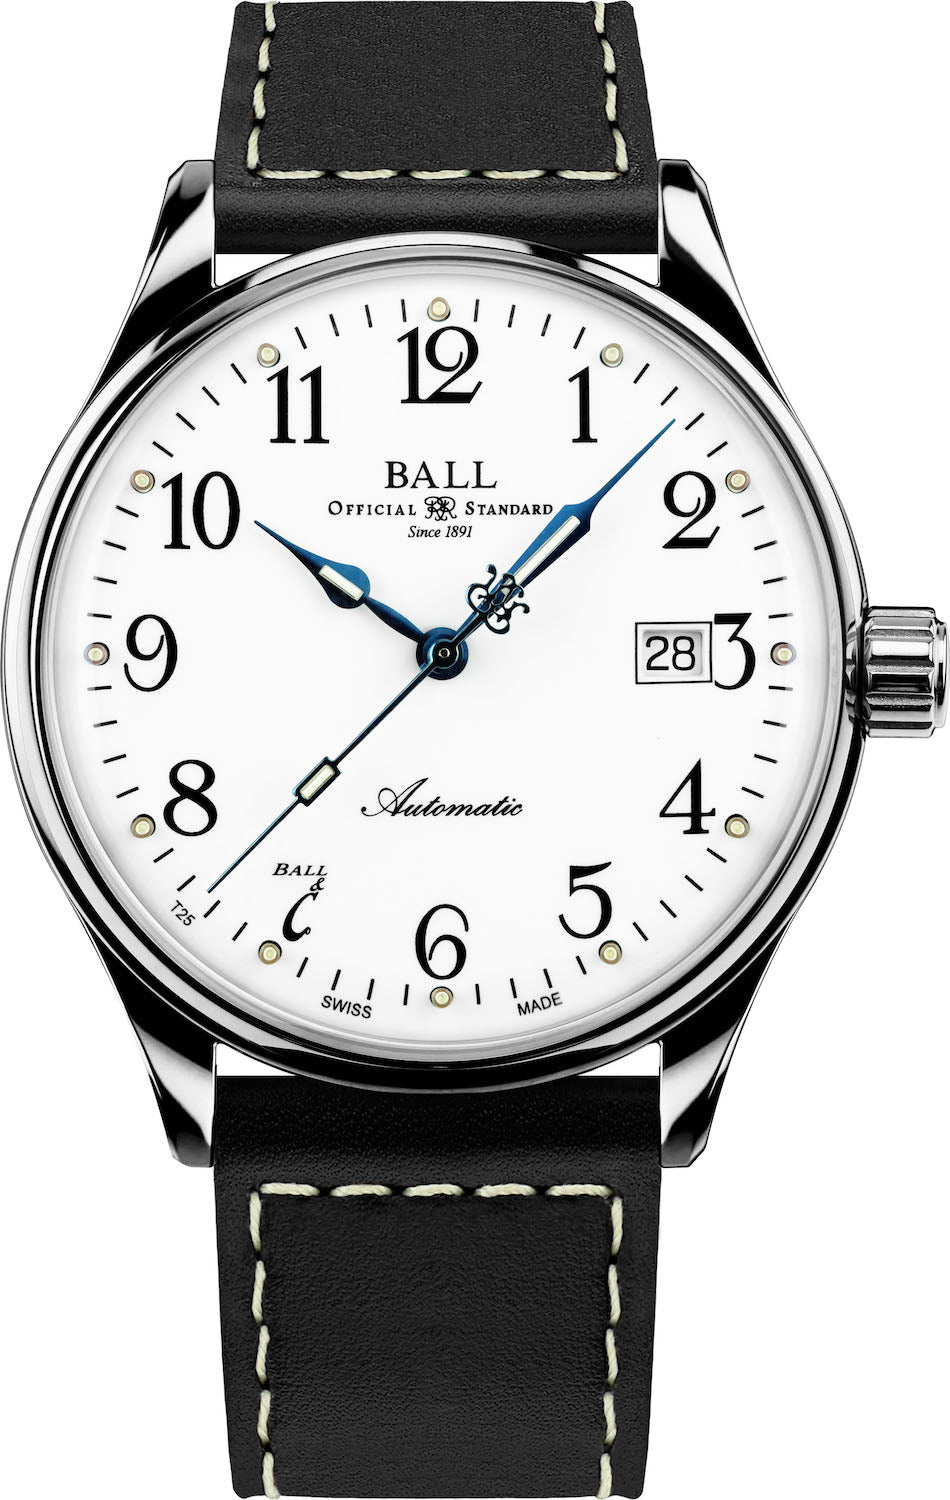 Ball Watch Company Trainmaster Standard Time 135 Anniversary Limited Edition